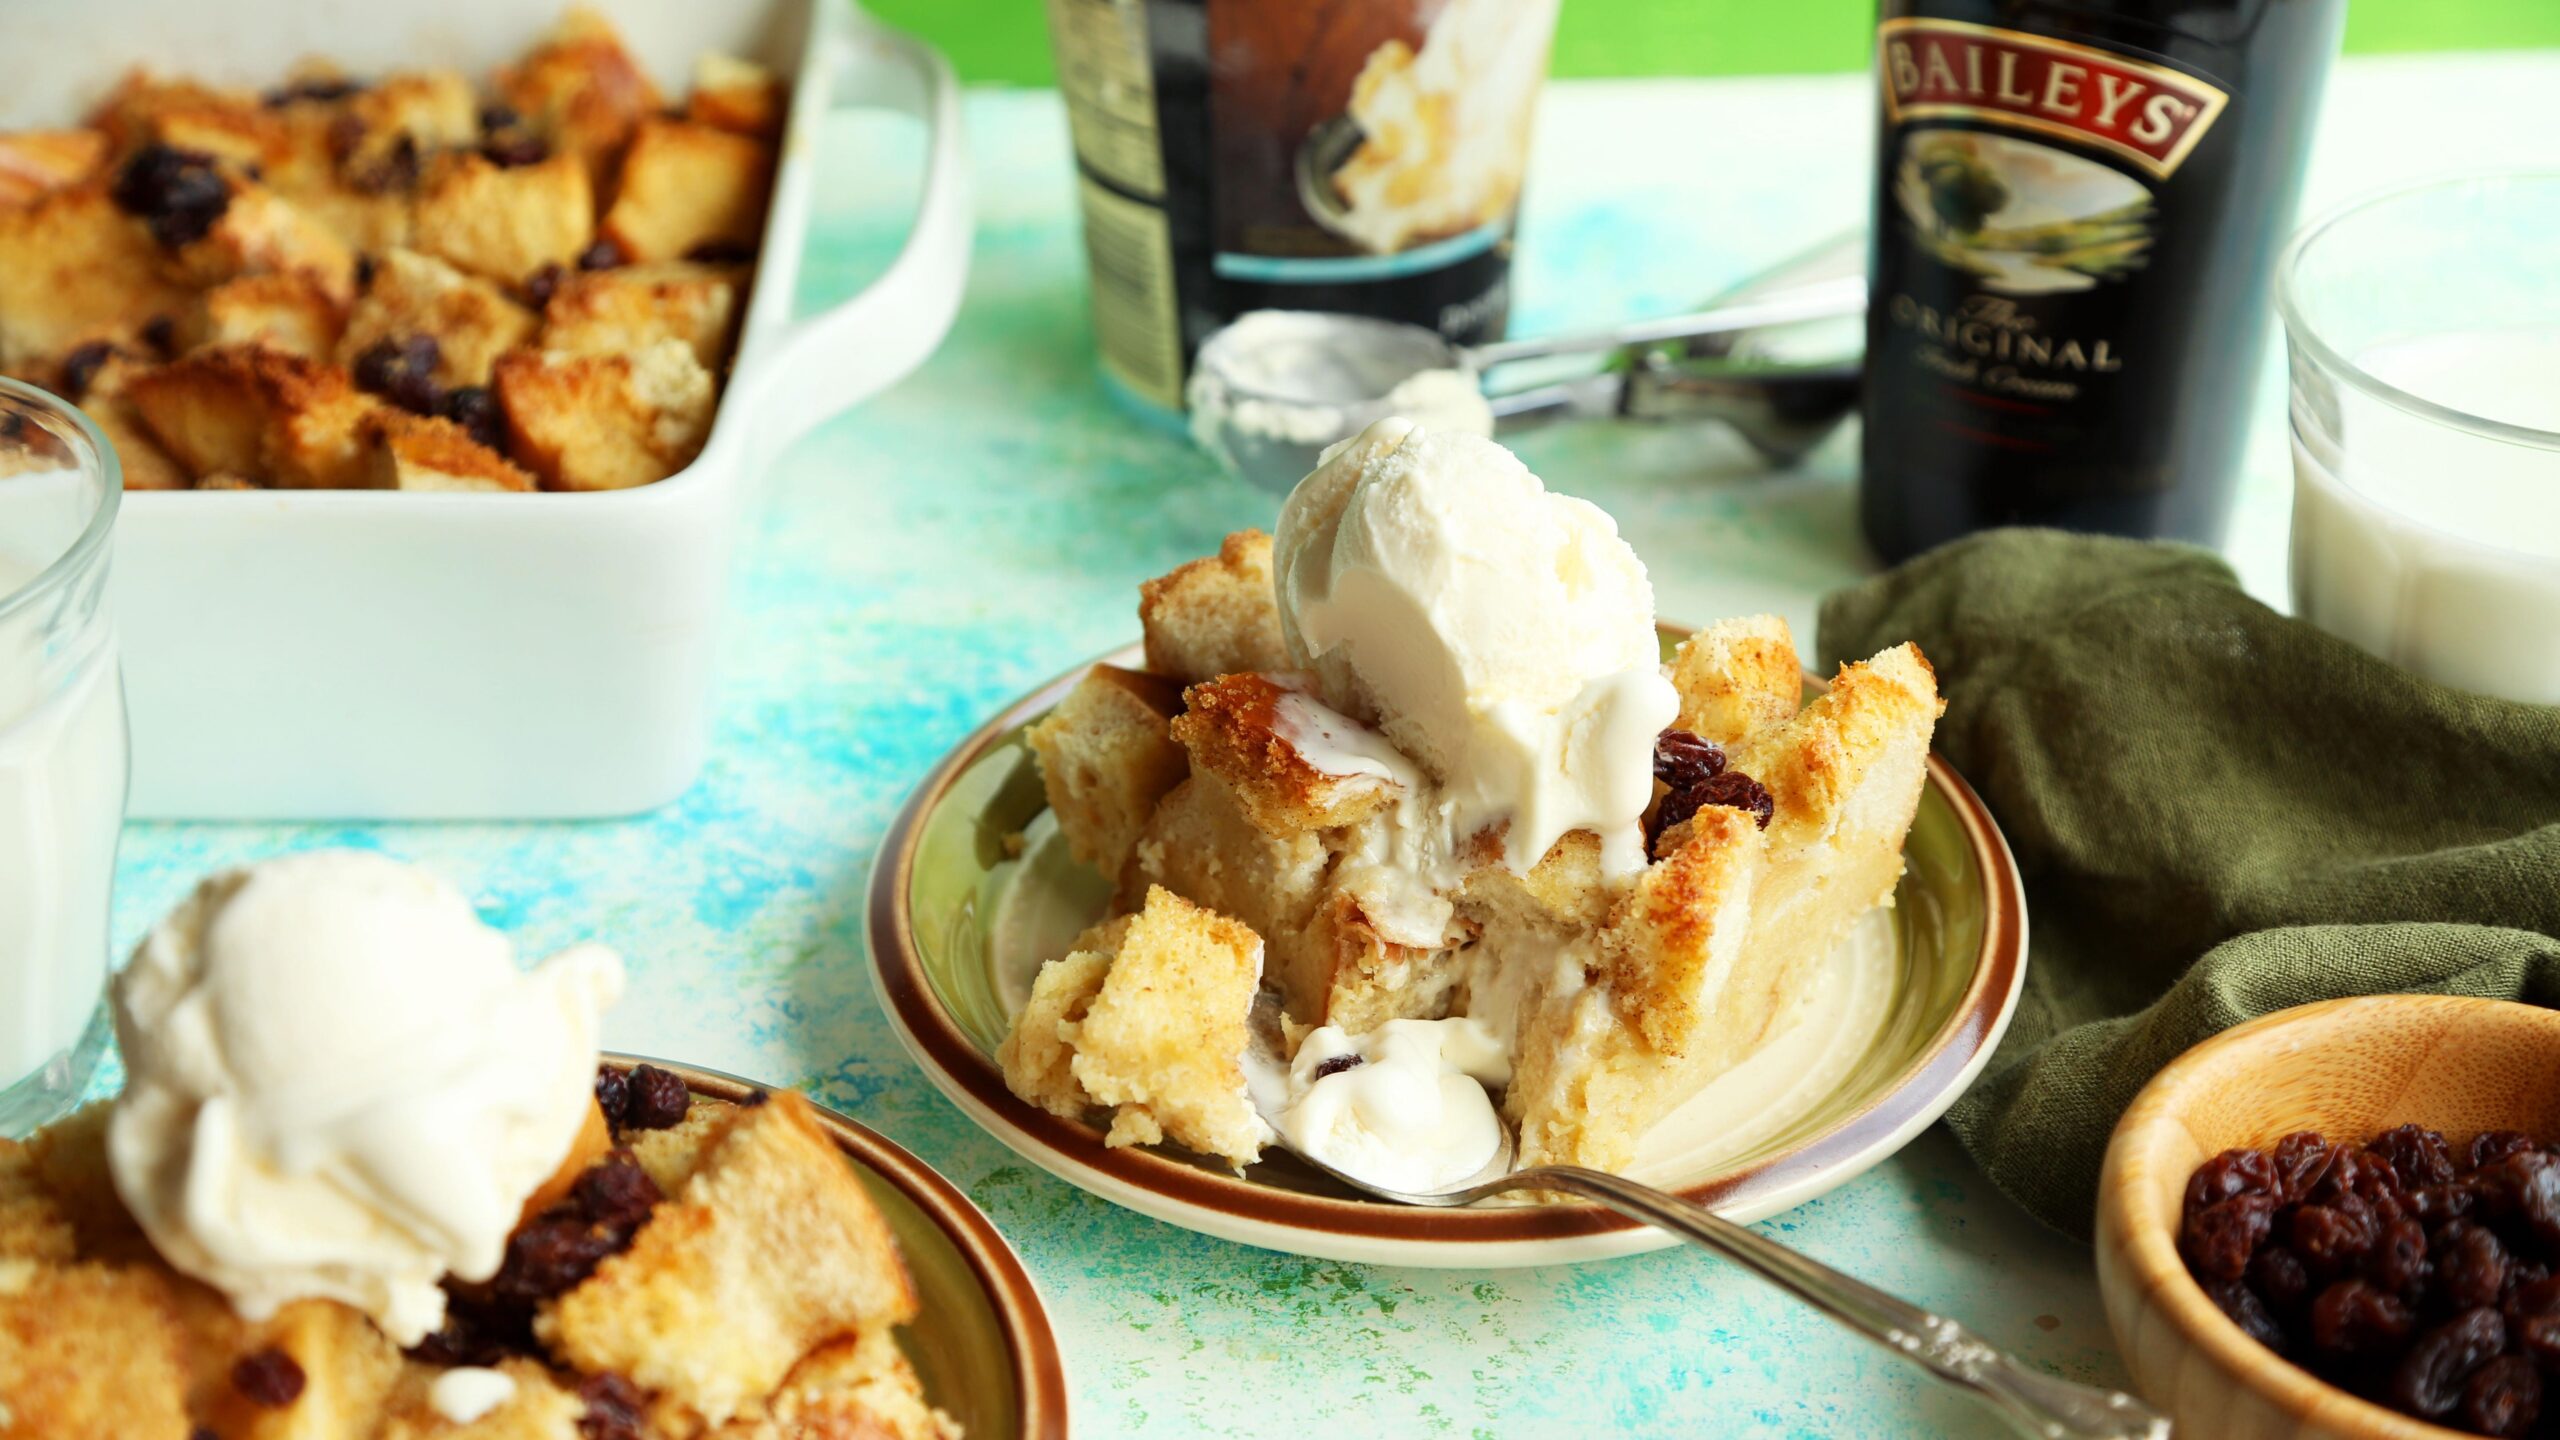  Satisfy your sweet tooth with this luxurious bread pudding.